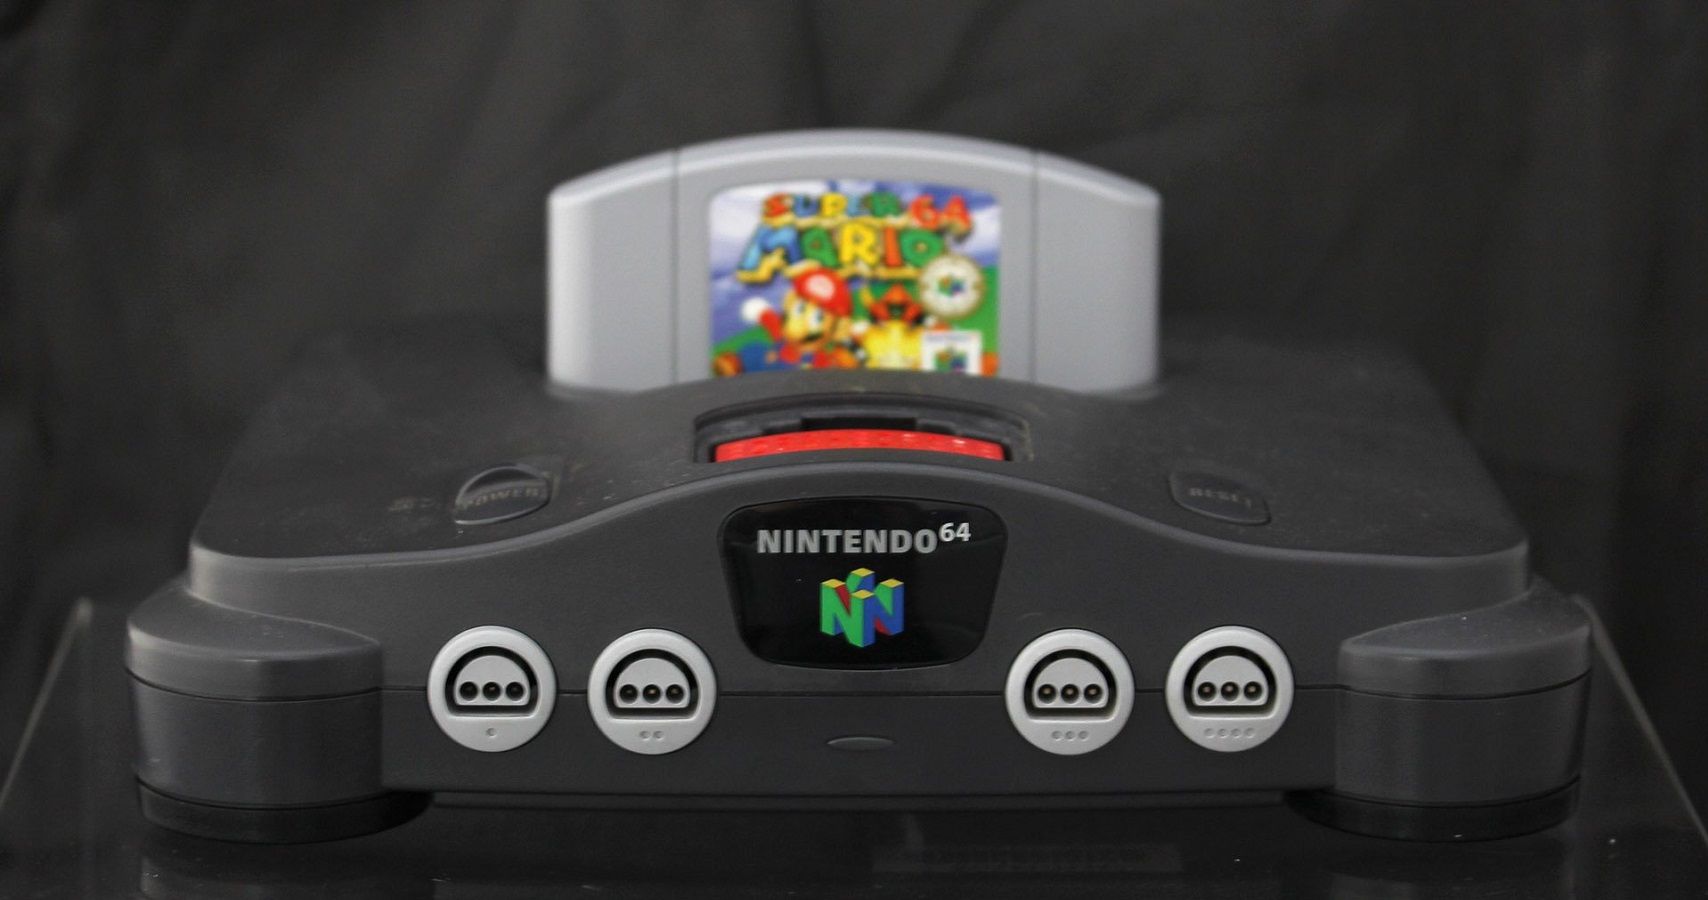 10 Best Consoles Of The 90s